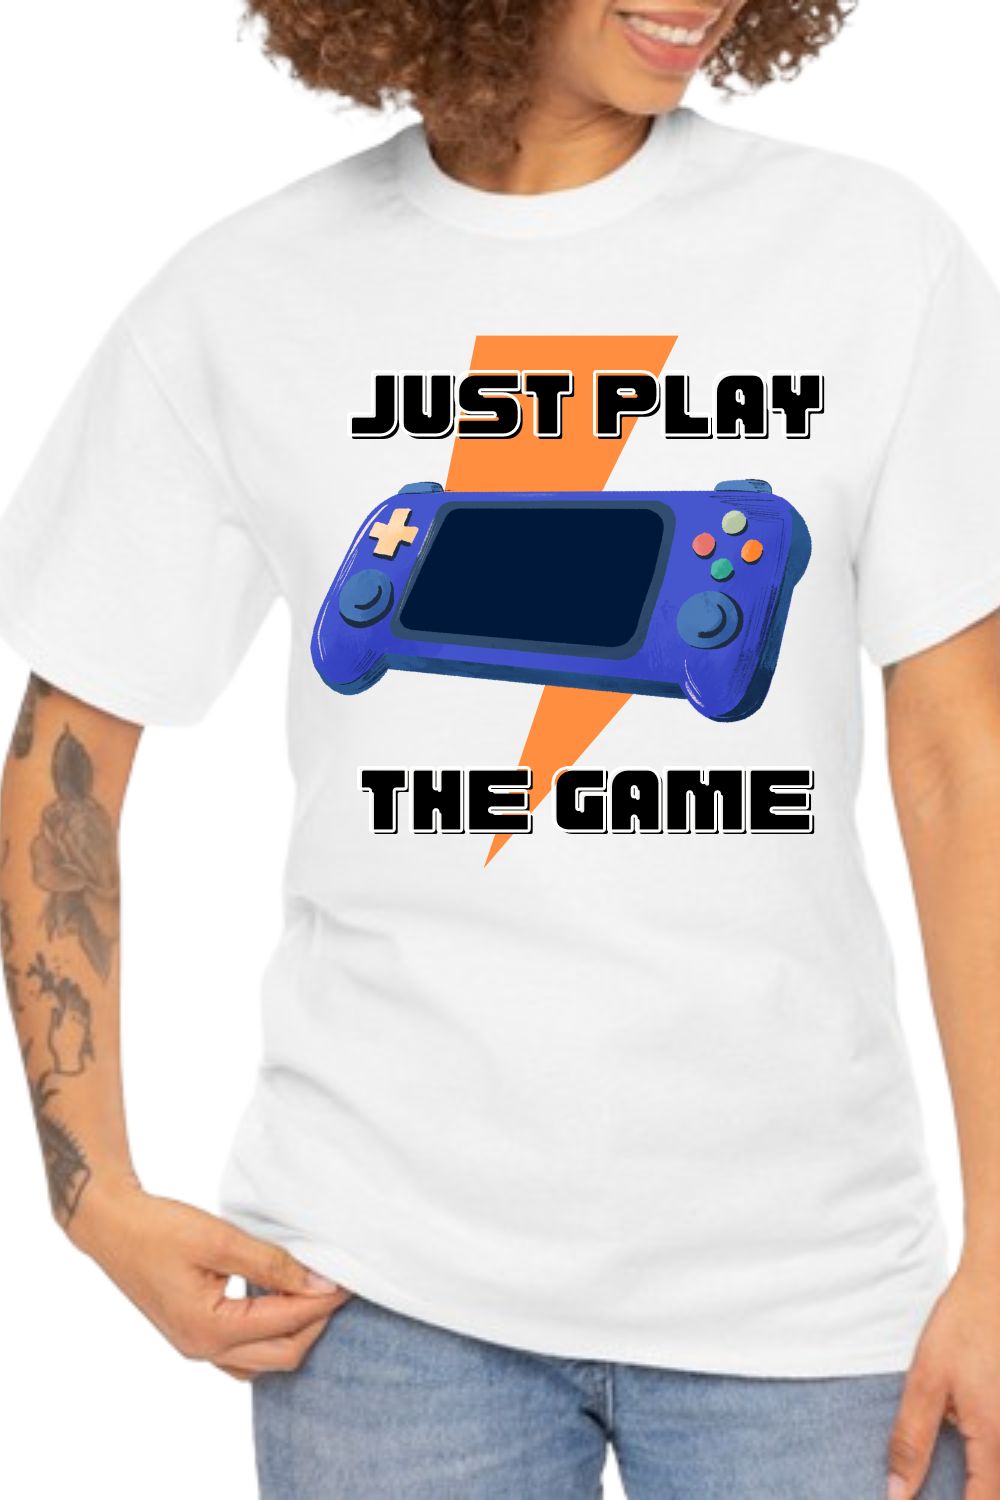 Just play the game t-shirt design pinterest preview image.